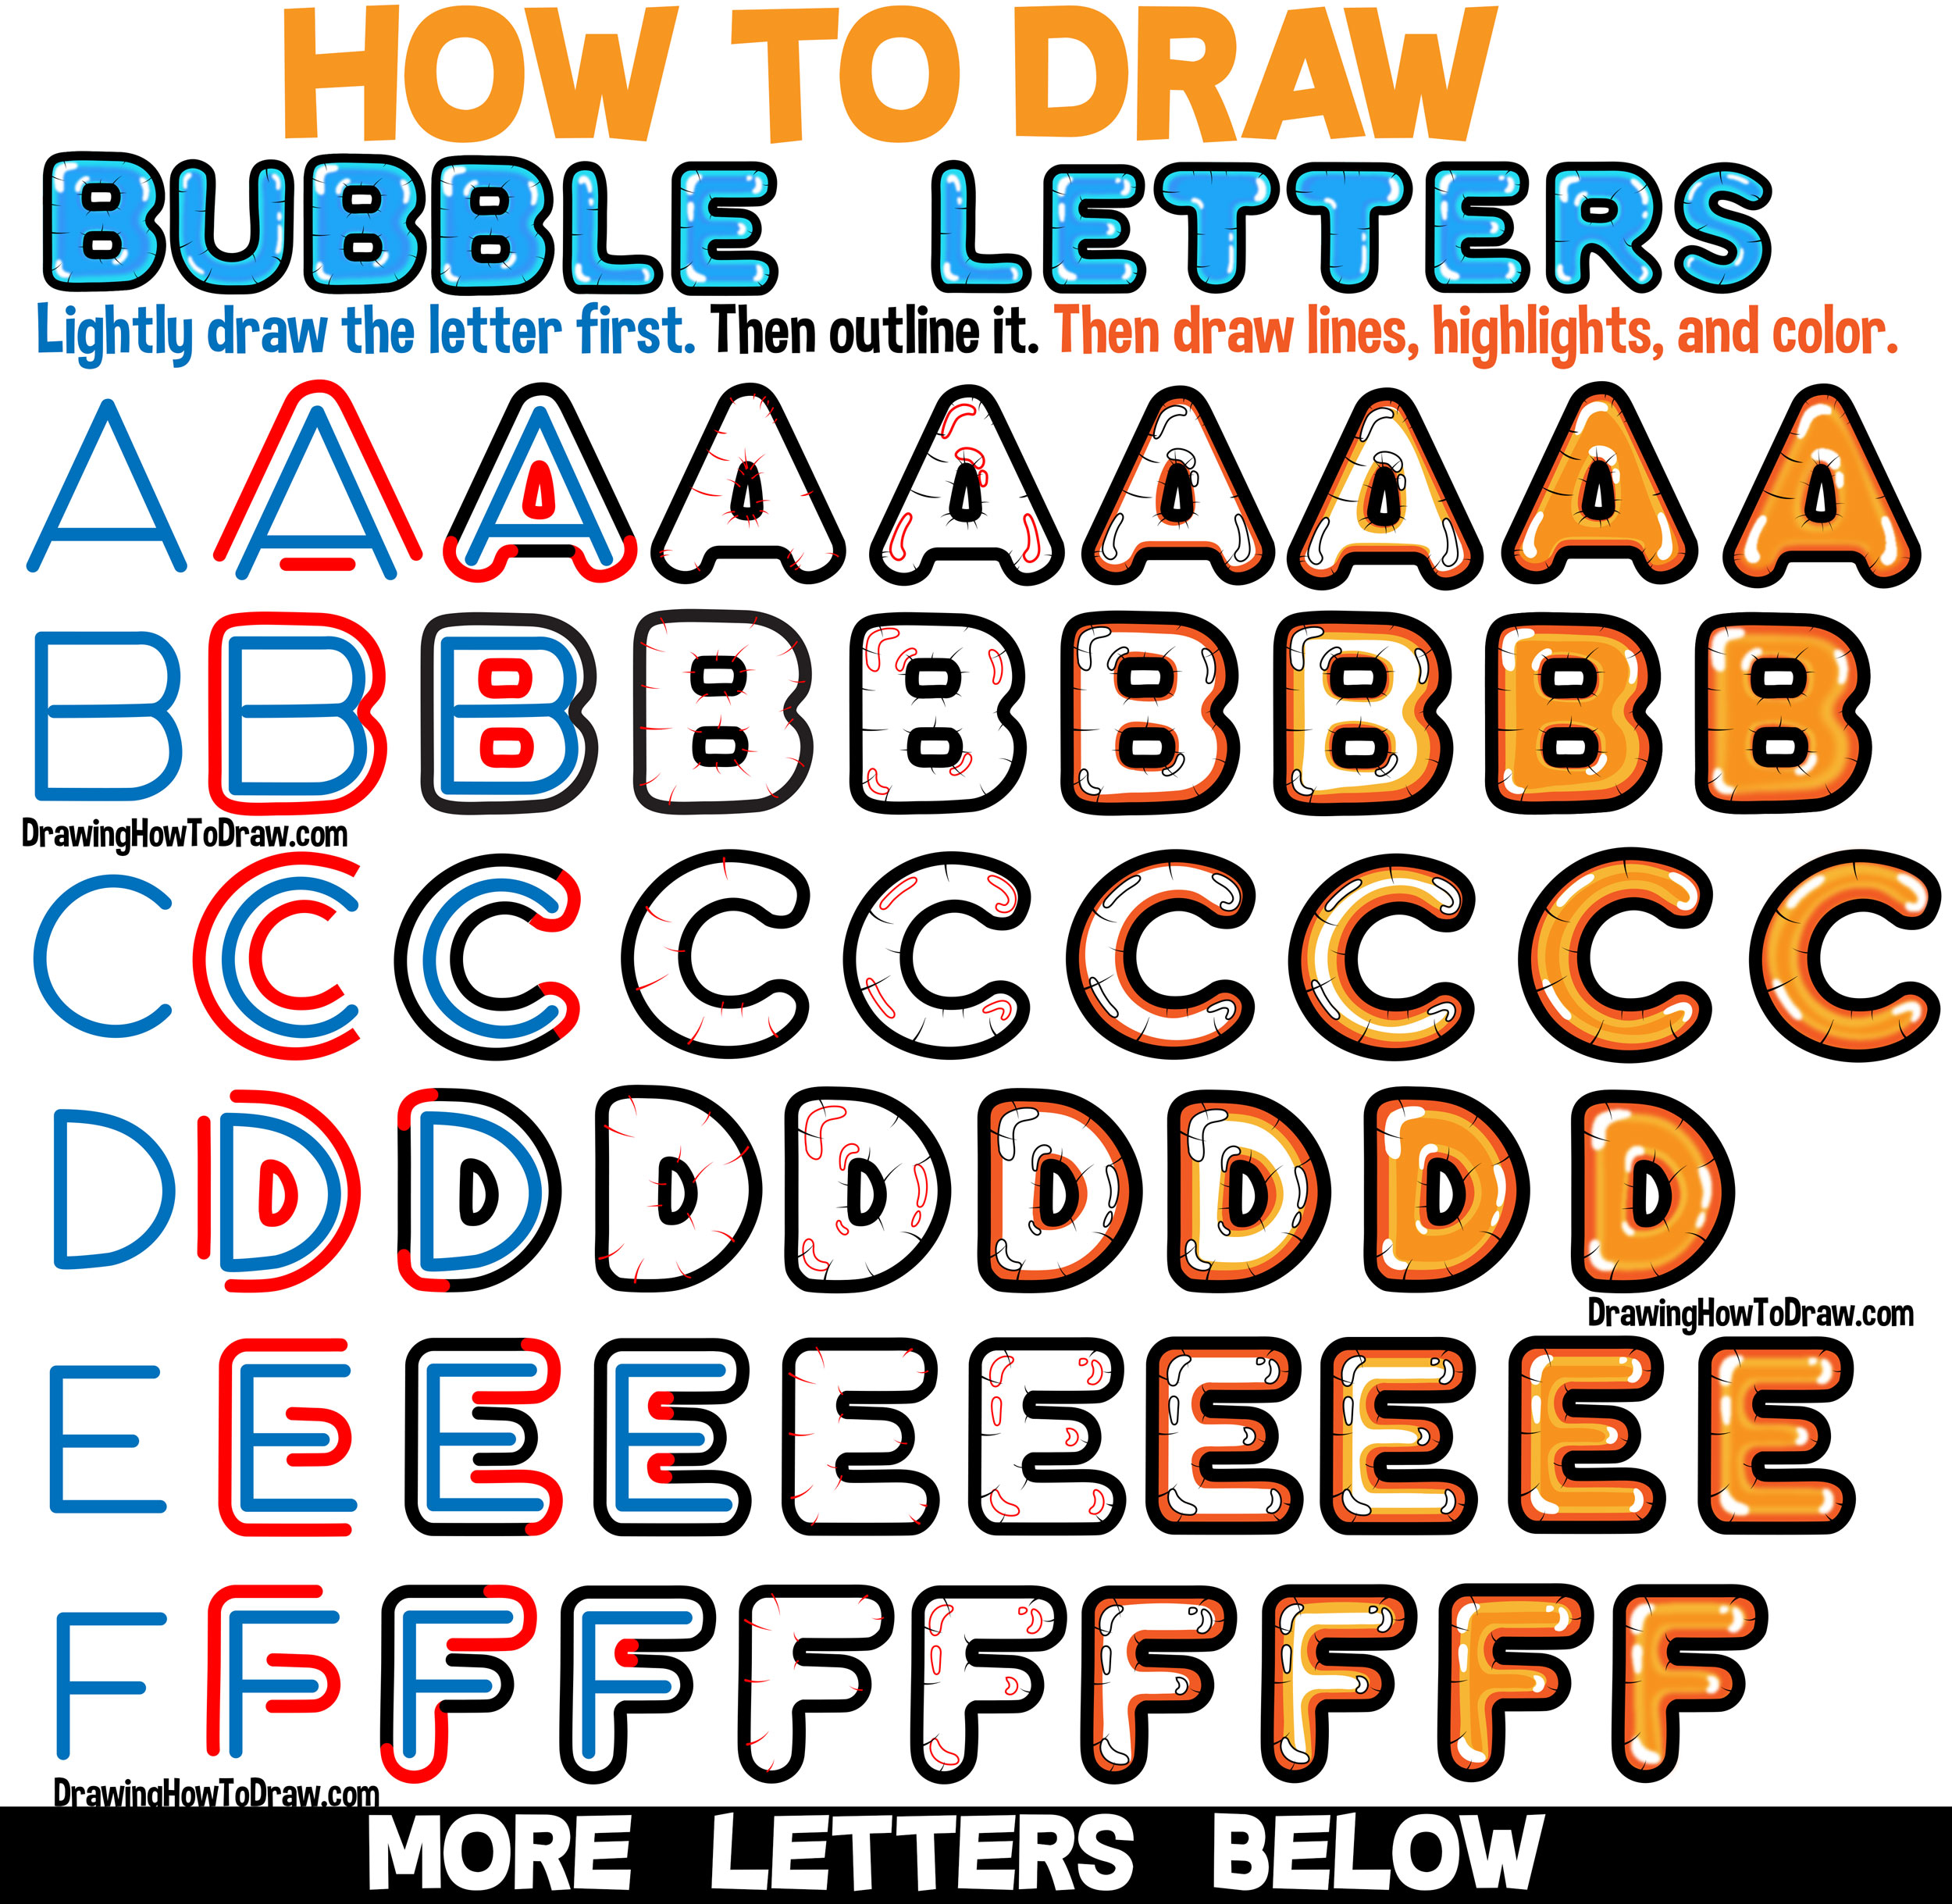 how-to-draw-bubble-balloon-letters-in-easy-step-by-step-drawing-tutorial-for-beginners-how-to